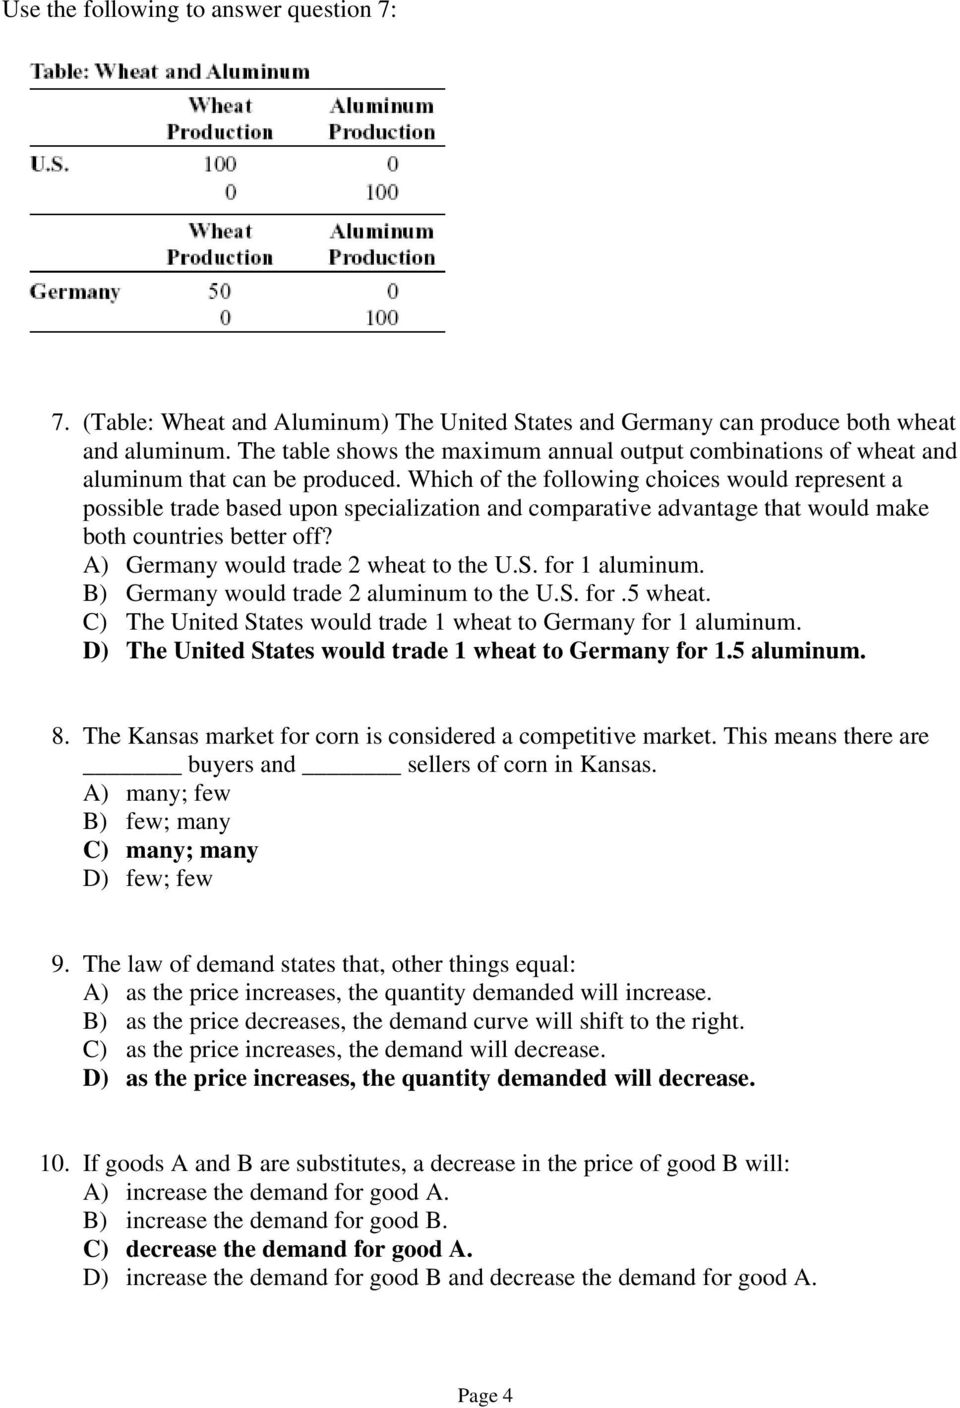 Which of the following choices would represent a possible trade based upon specialization and comparative advantage that would make both countries better off? A) Germany would trade 2 wheat to the U.